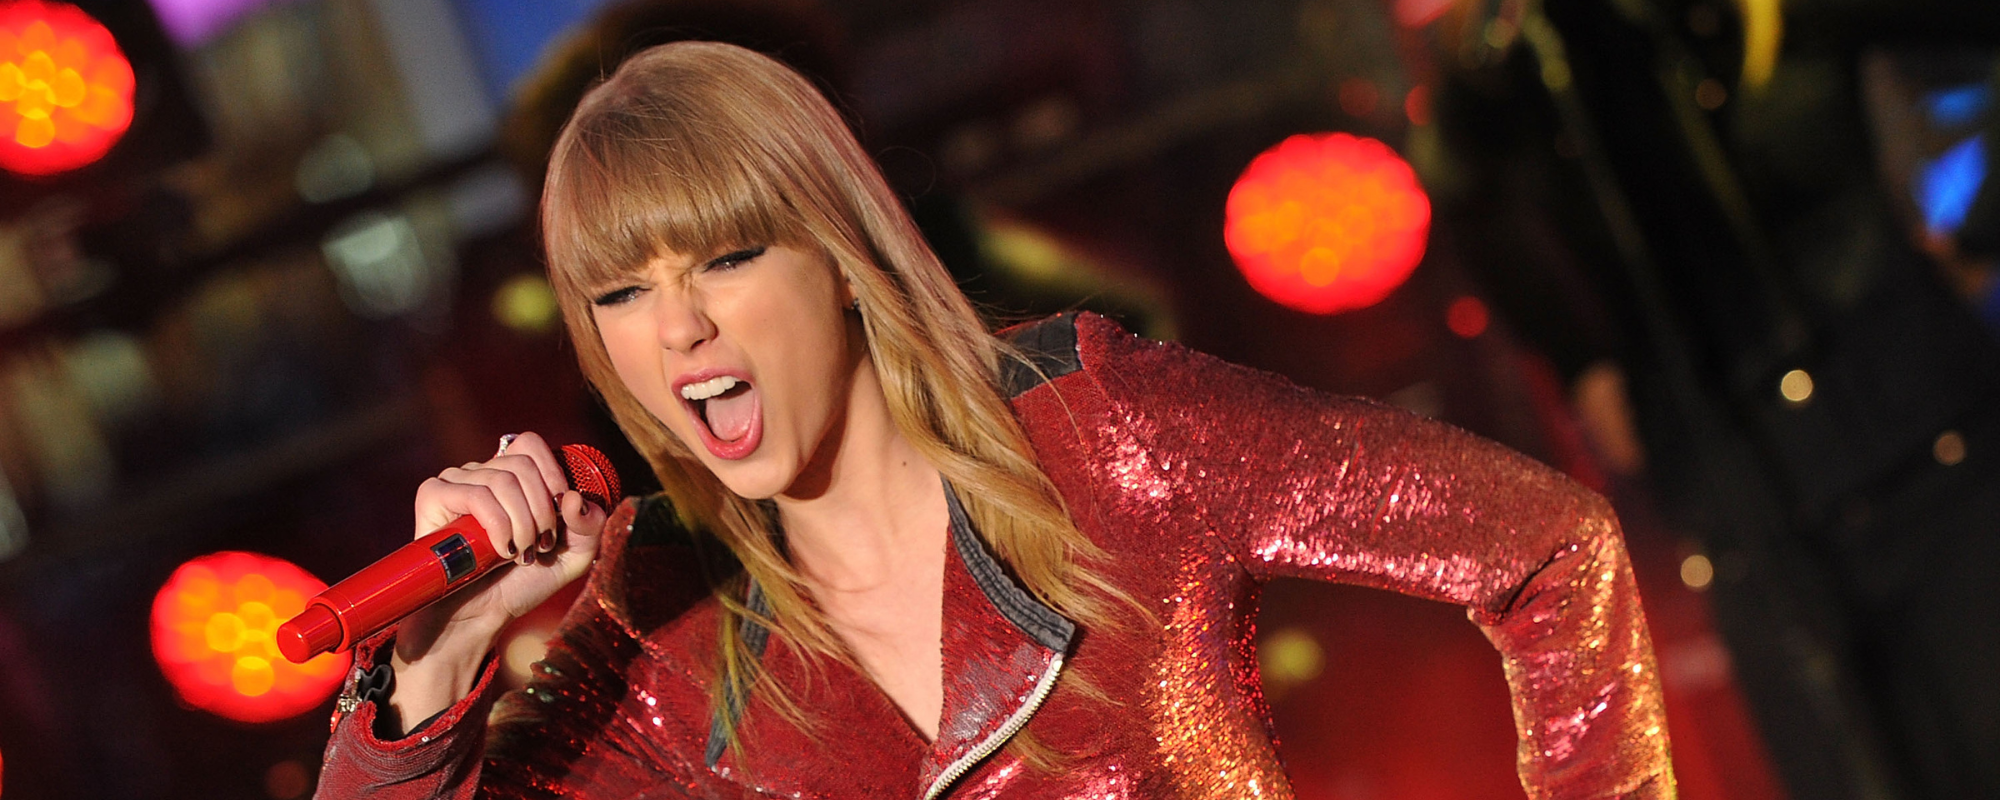 5 Essential Taylor Swift Songs for Navigating Life’s Ups and Downs